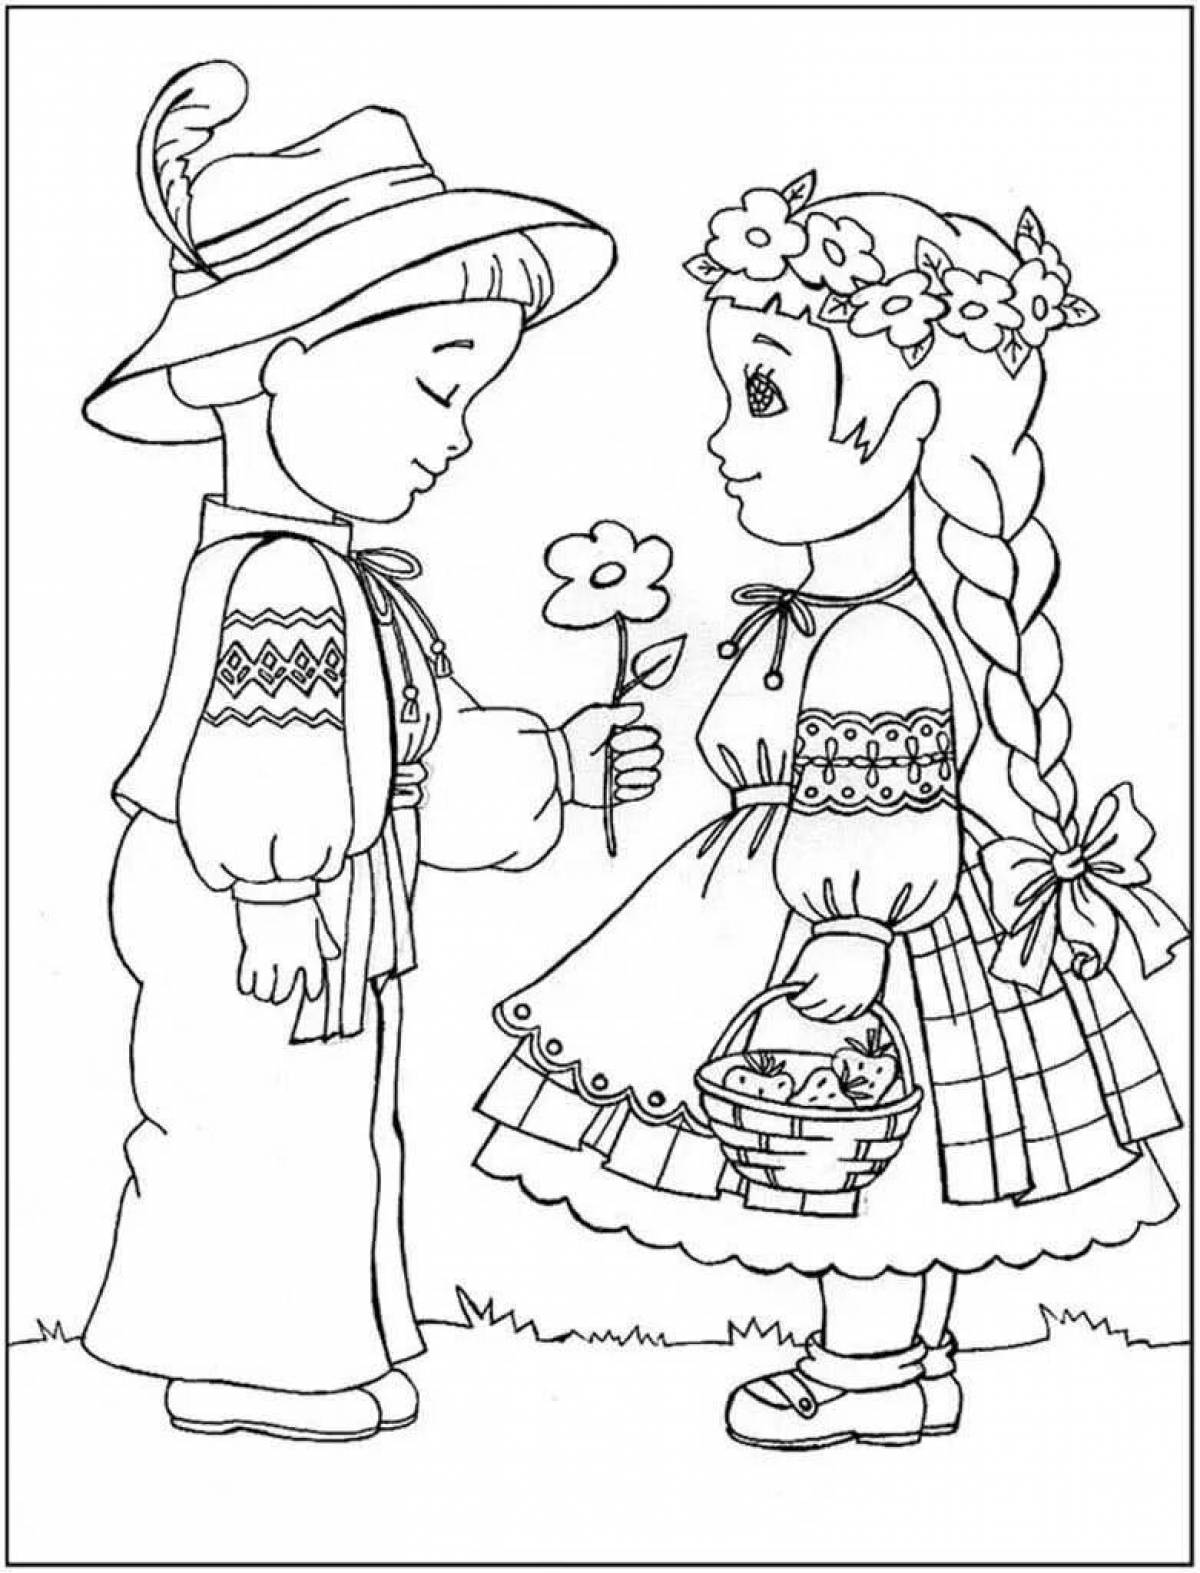 Colorful belarusian clothes coloring pages for kids